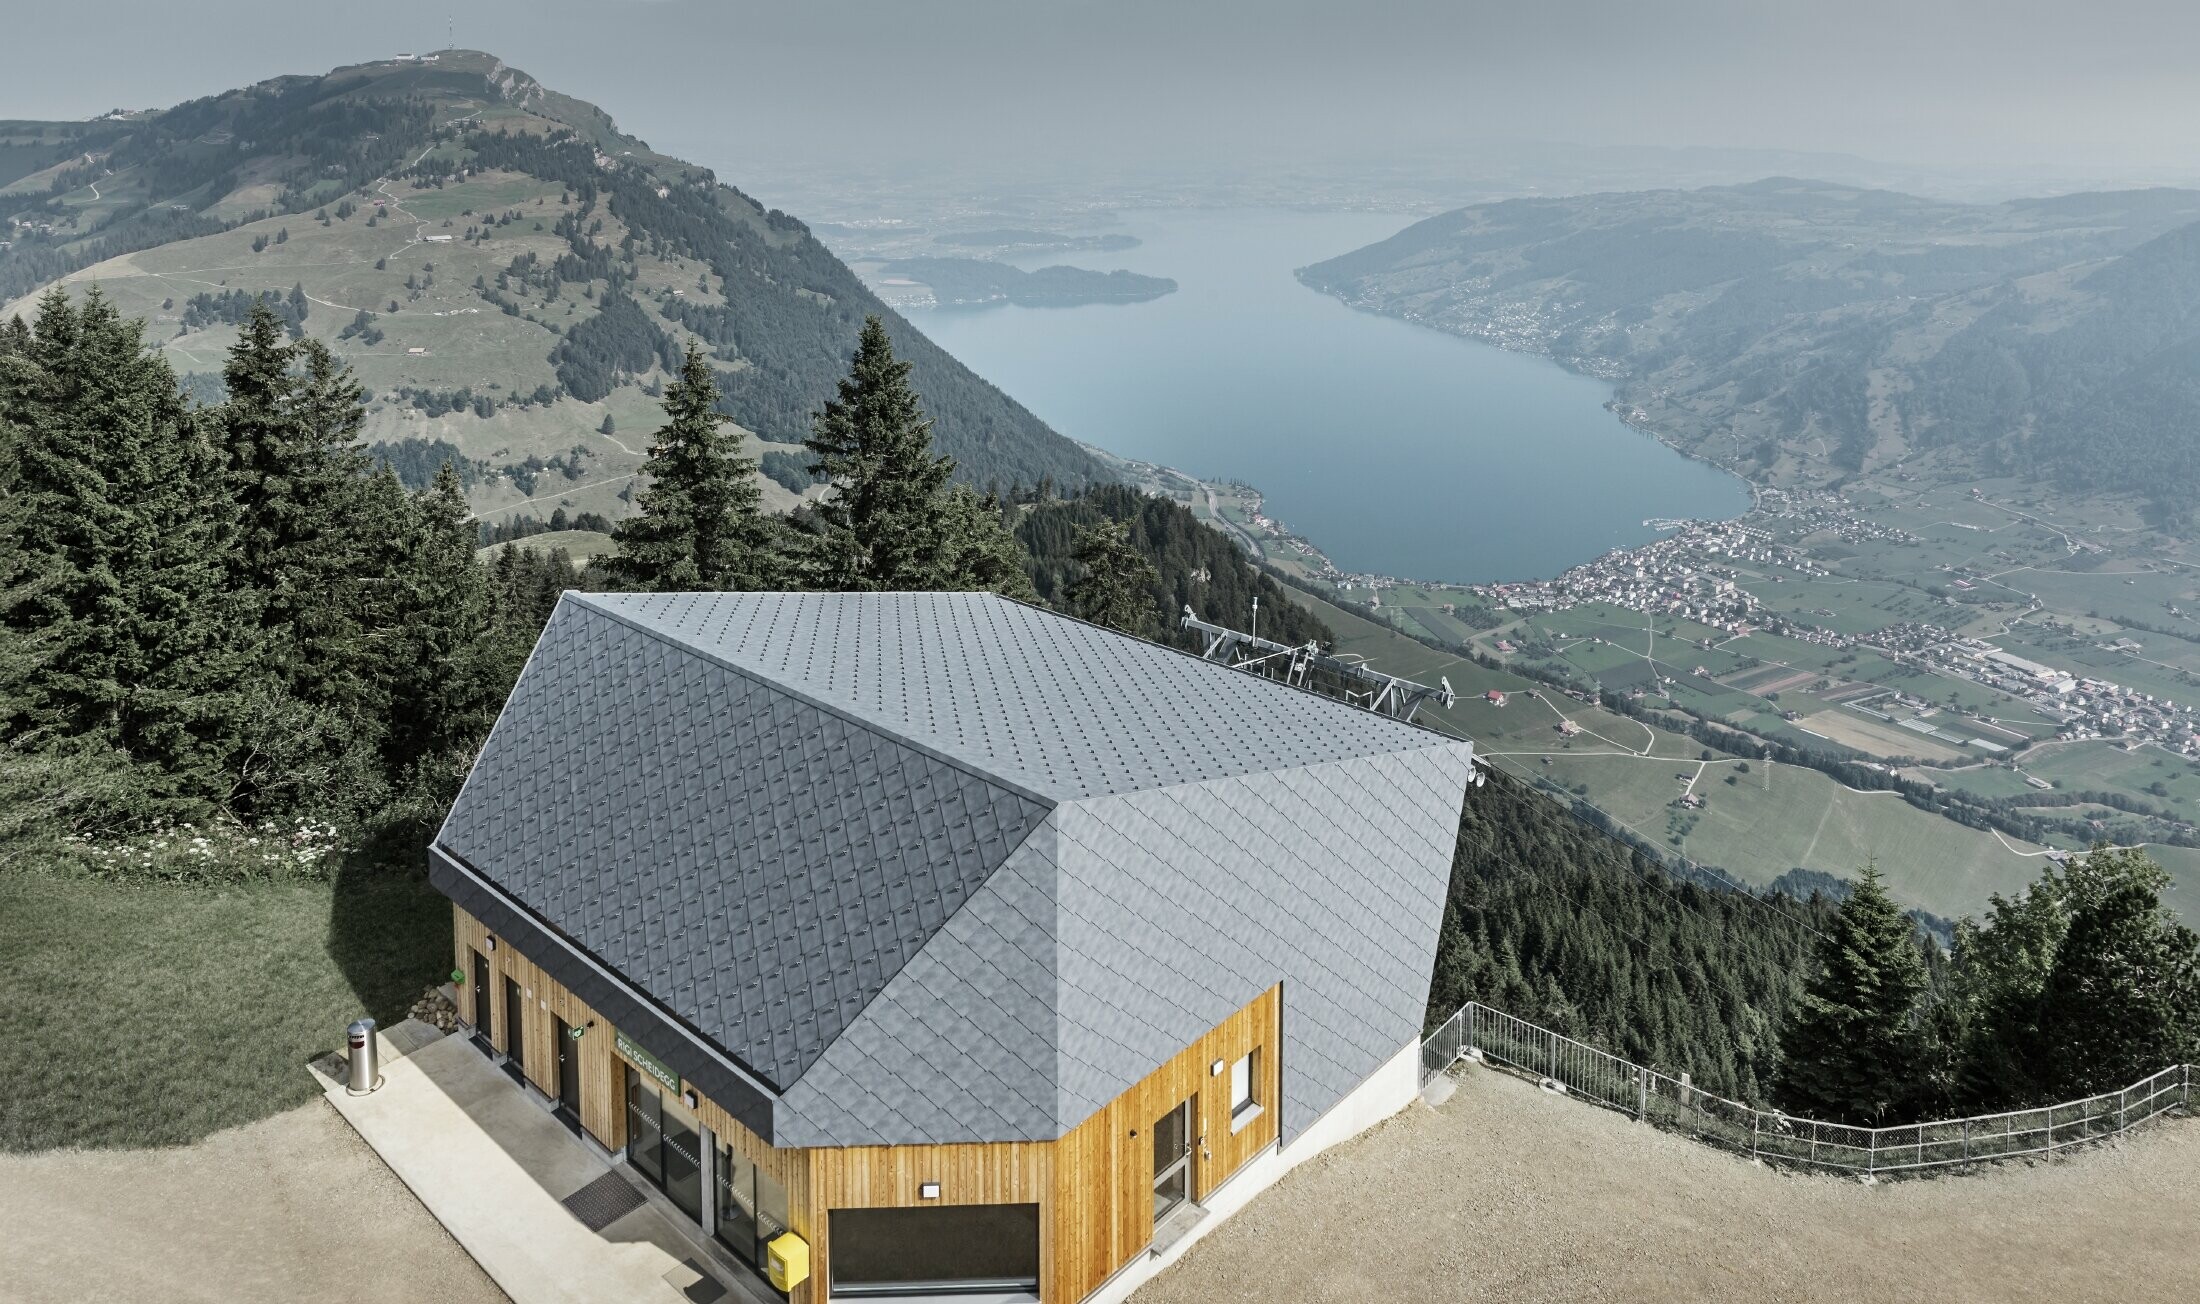 Aerial view of the Rigi Scheidegg cable car mountain station clad in the PREFA 44 x 44 rhomboid façade tile in P.10 stone grey and wood.